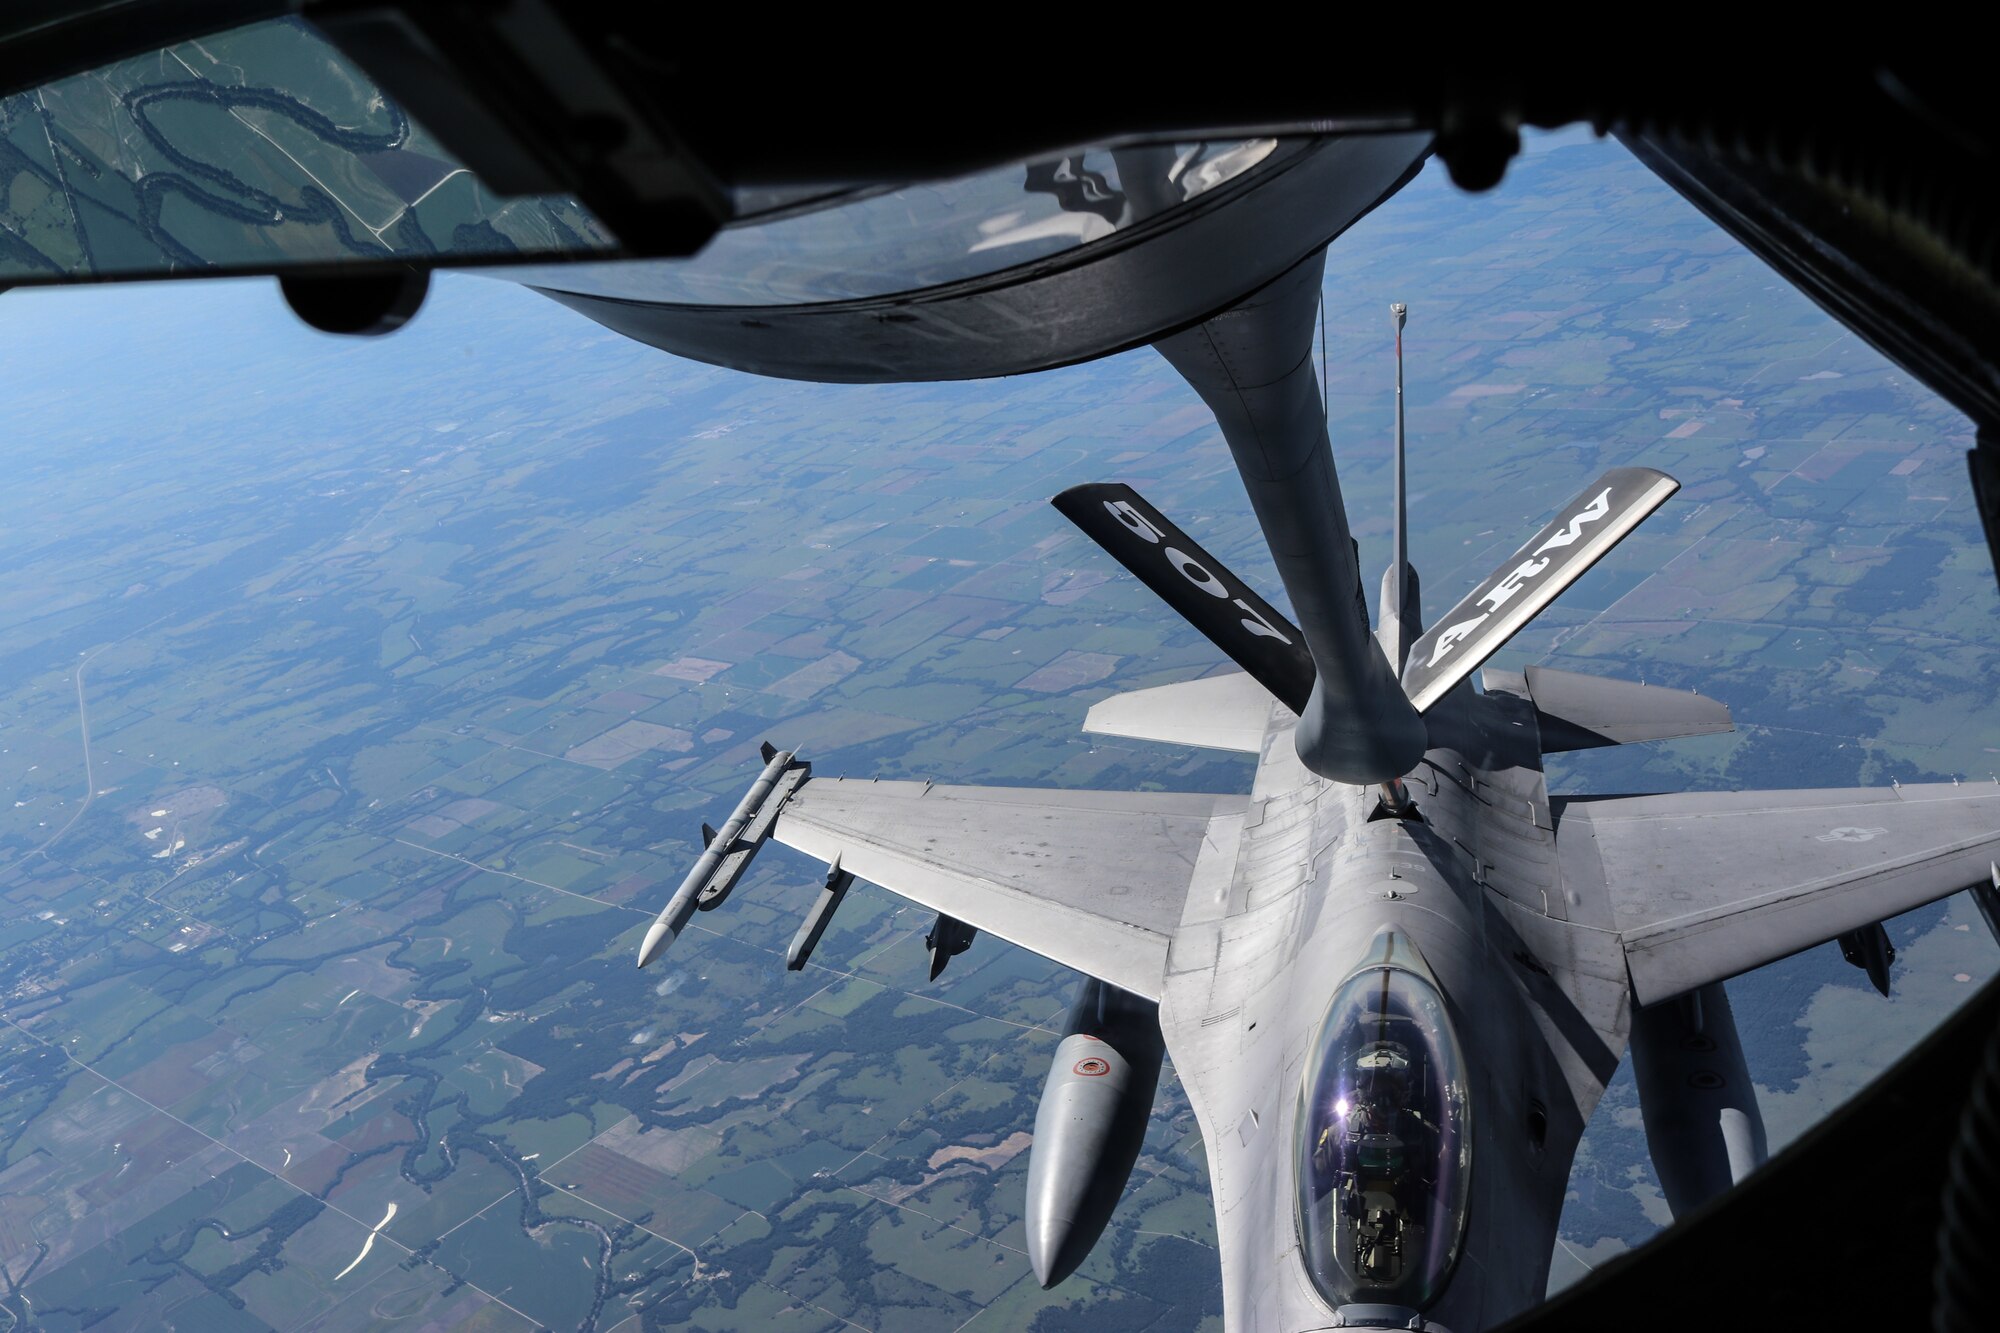 A 138th Fighter Wing F-16 Fighting Falcon receives fuel from a 507th Air Refueling Wing KC-135R Statotanker during a congressional orientation flight, Aug. 15, 2019, at Tinker Air Force Base, Oklahoma. The Okies shared the Reserve mission and a unique experience with the congressional delegation. (U.S. Air Force photo by Senior Airman Mary Begy)